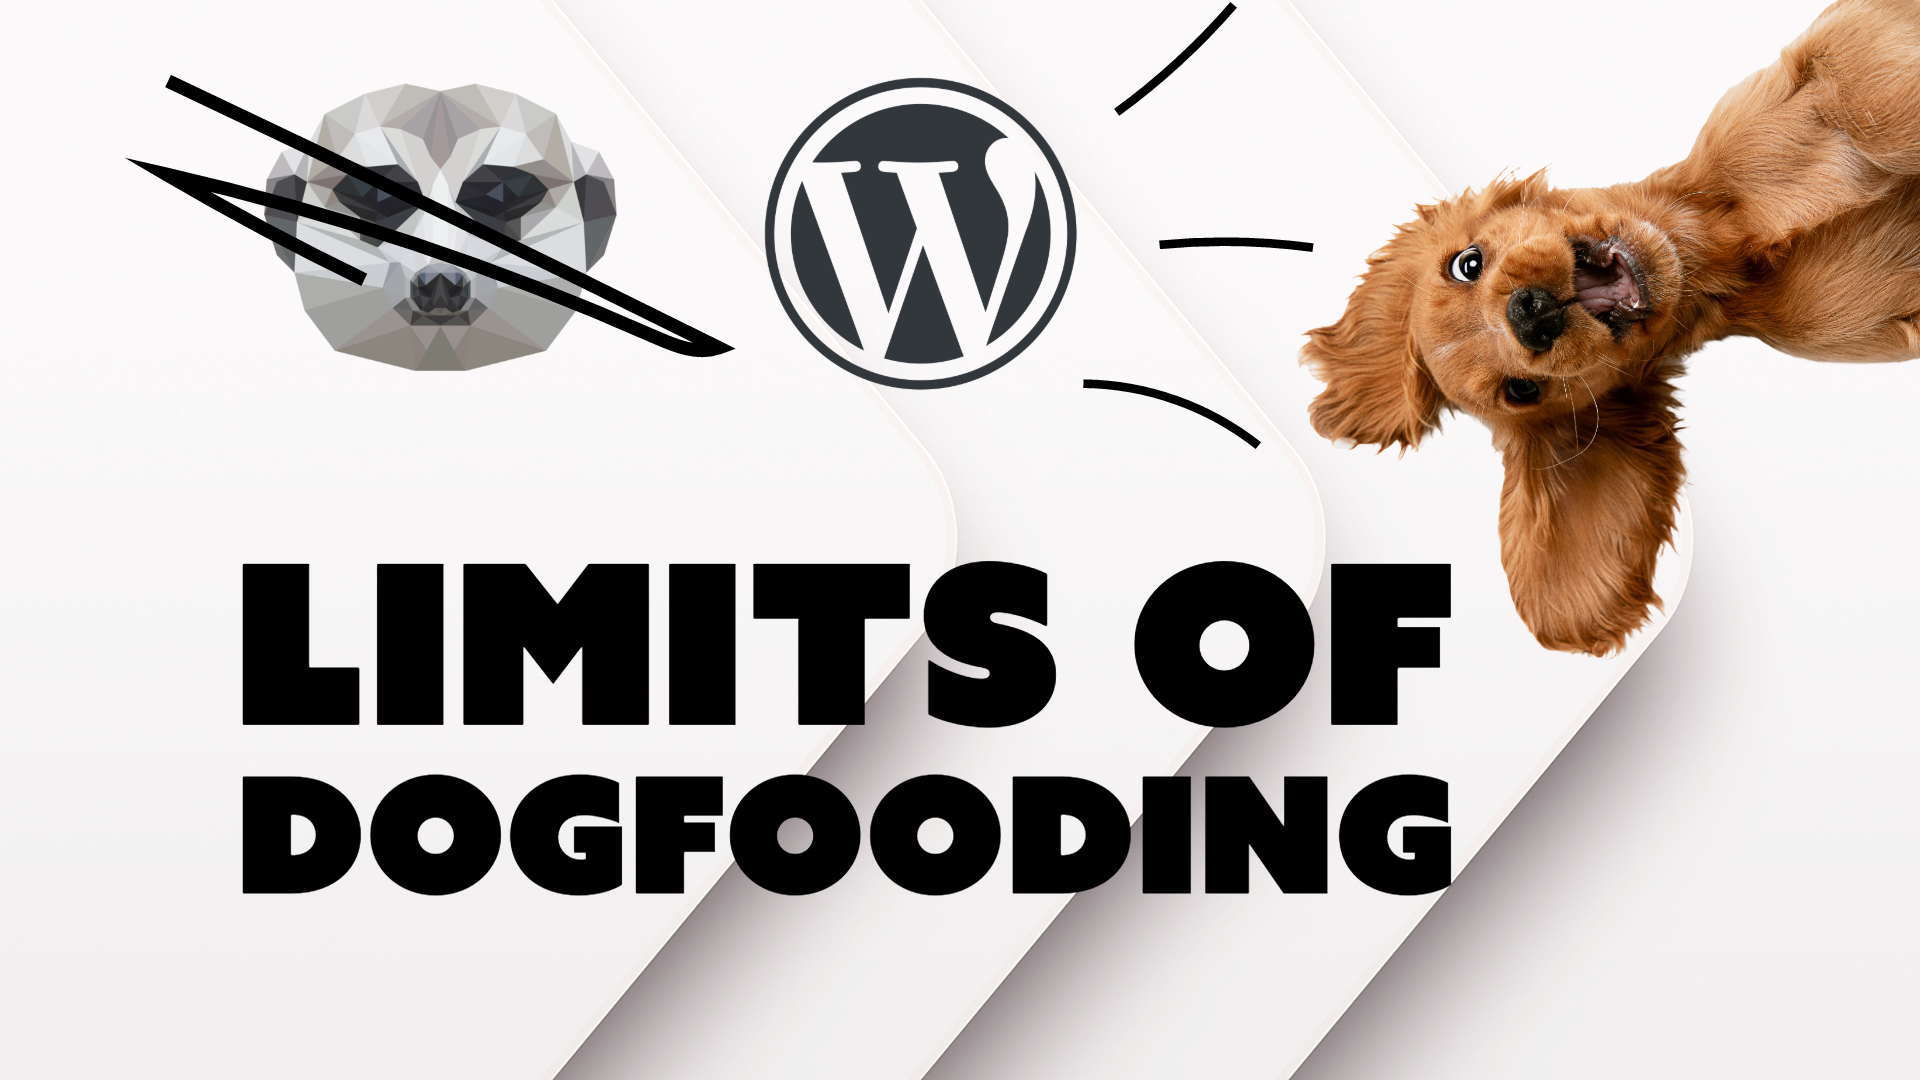 Why did I use WordPress with a standard theme? On the limits of eating your own dog food.